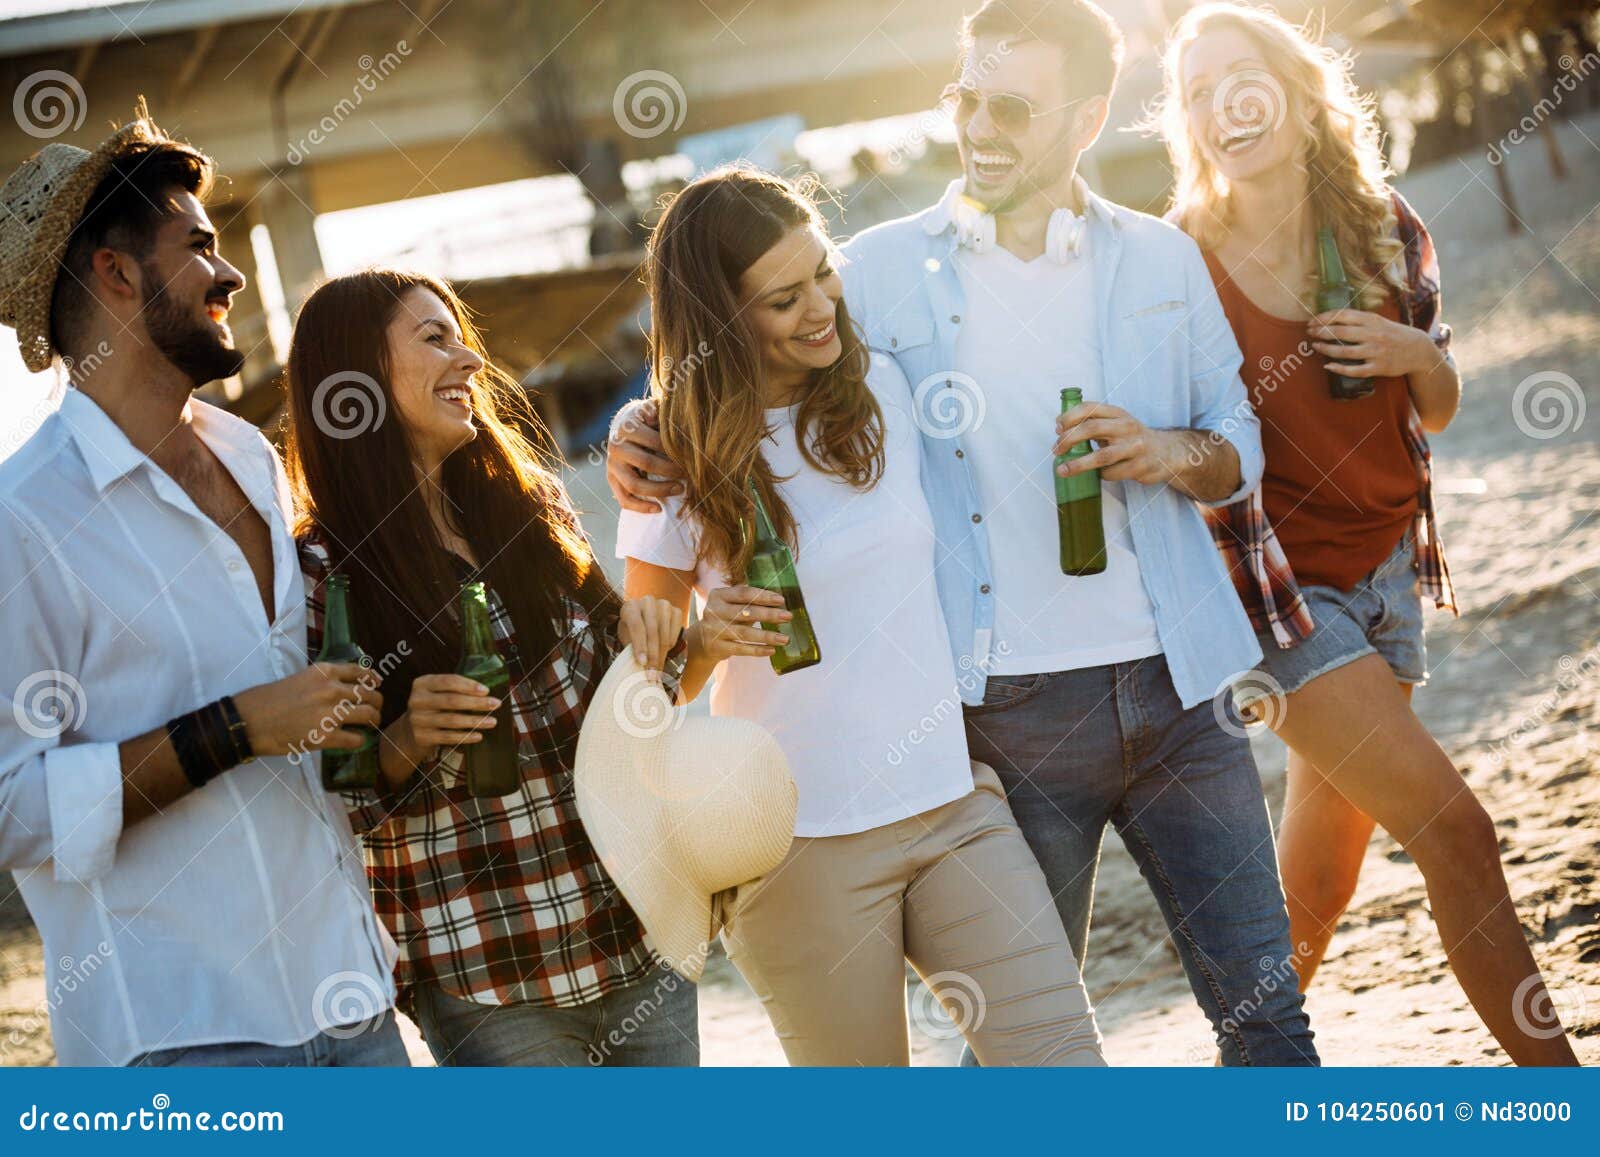 Group of Happy Young People Enjoying Summer Vacation Stock Image ...